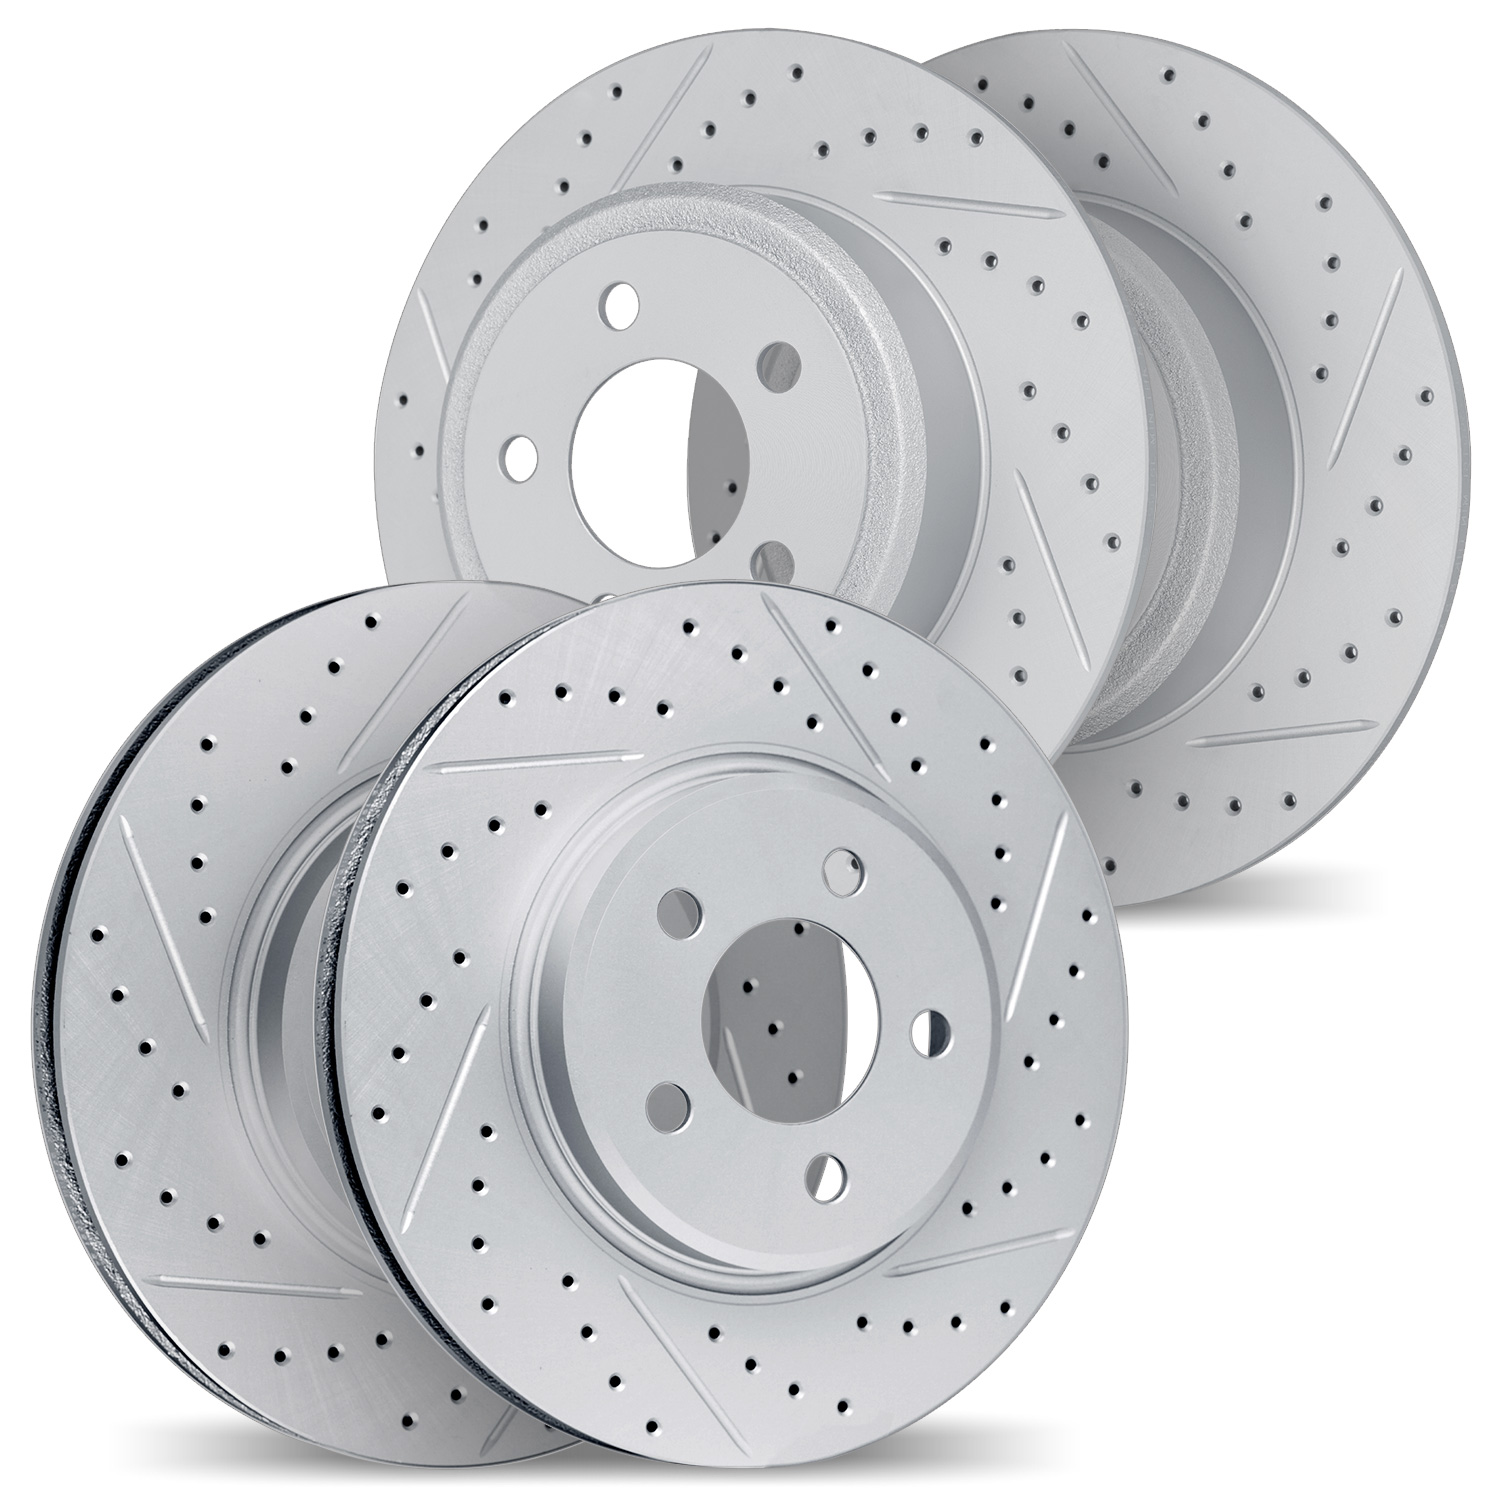 2004-63016 Geoperformance Drilled/Slotted Brake Rotors, 2003-2005 Mercedes-Benz, Position: Front and Rear